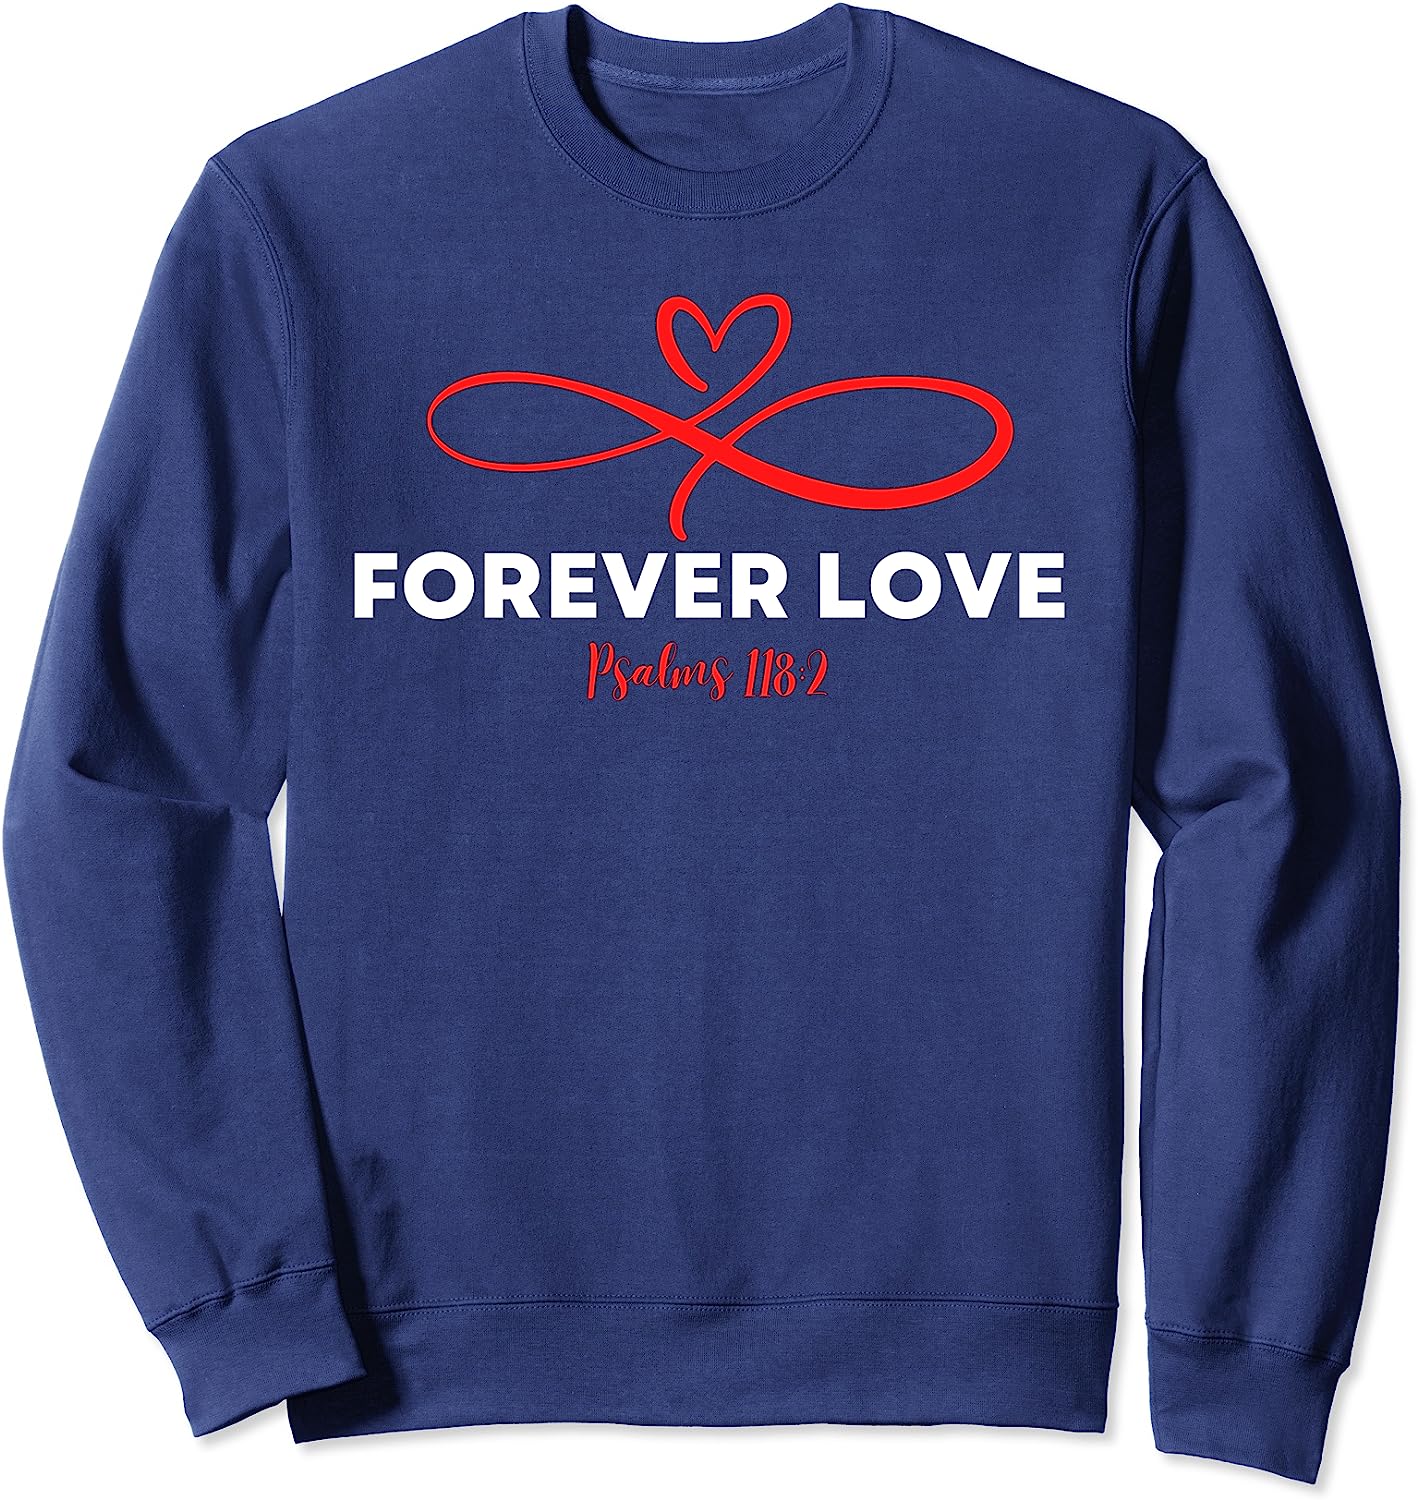 Forever Love - Sweatshirt - Fun and Inspirational Design by Crucial Key